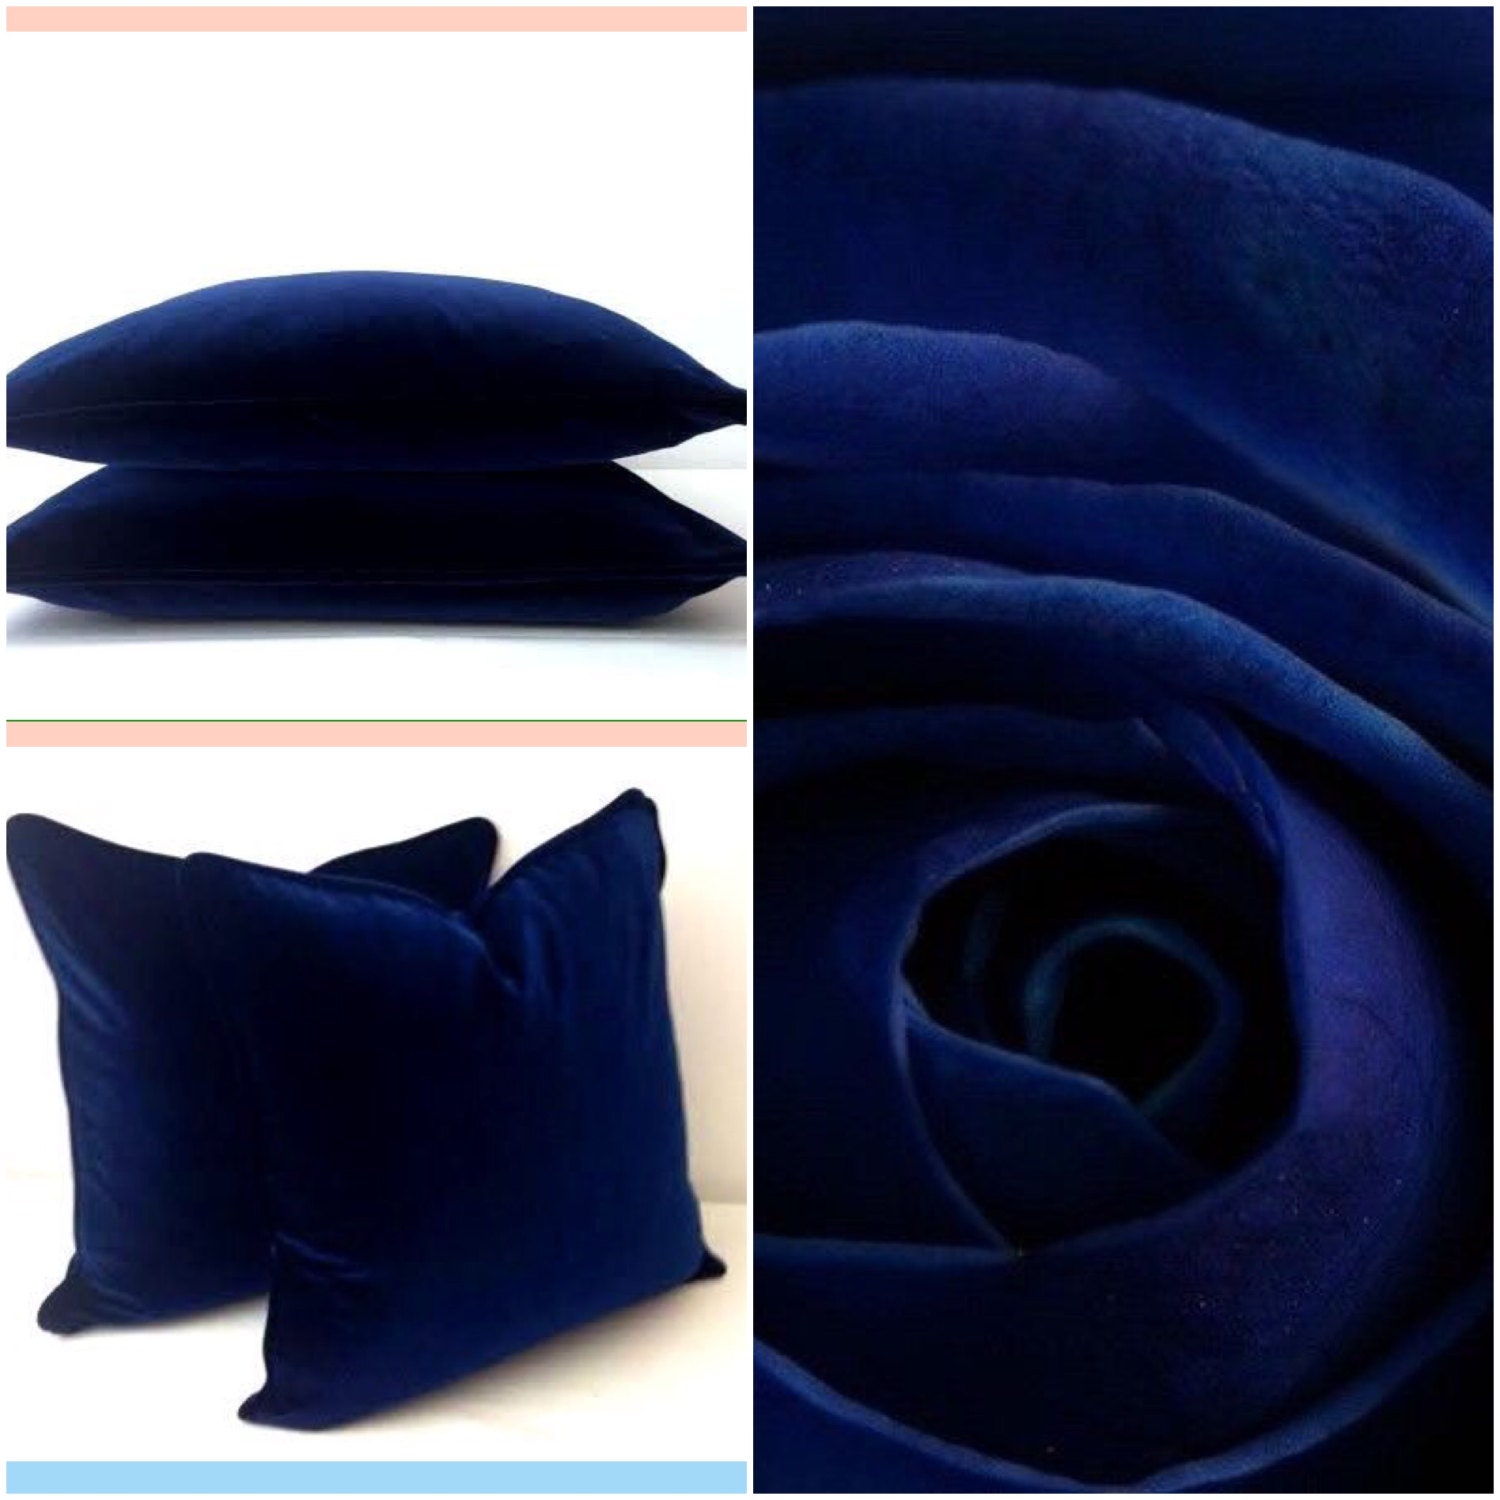 Navy Blue Velvet Throw Pillow Cover 18 by 18 by ...